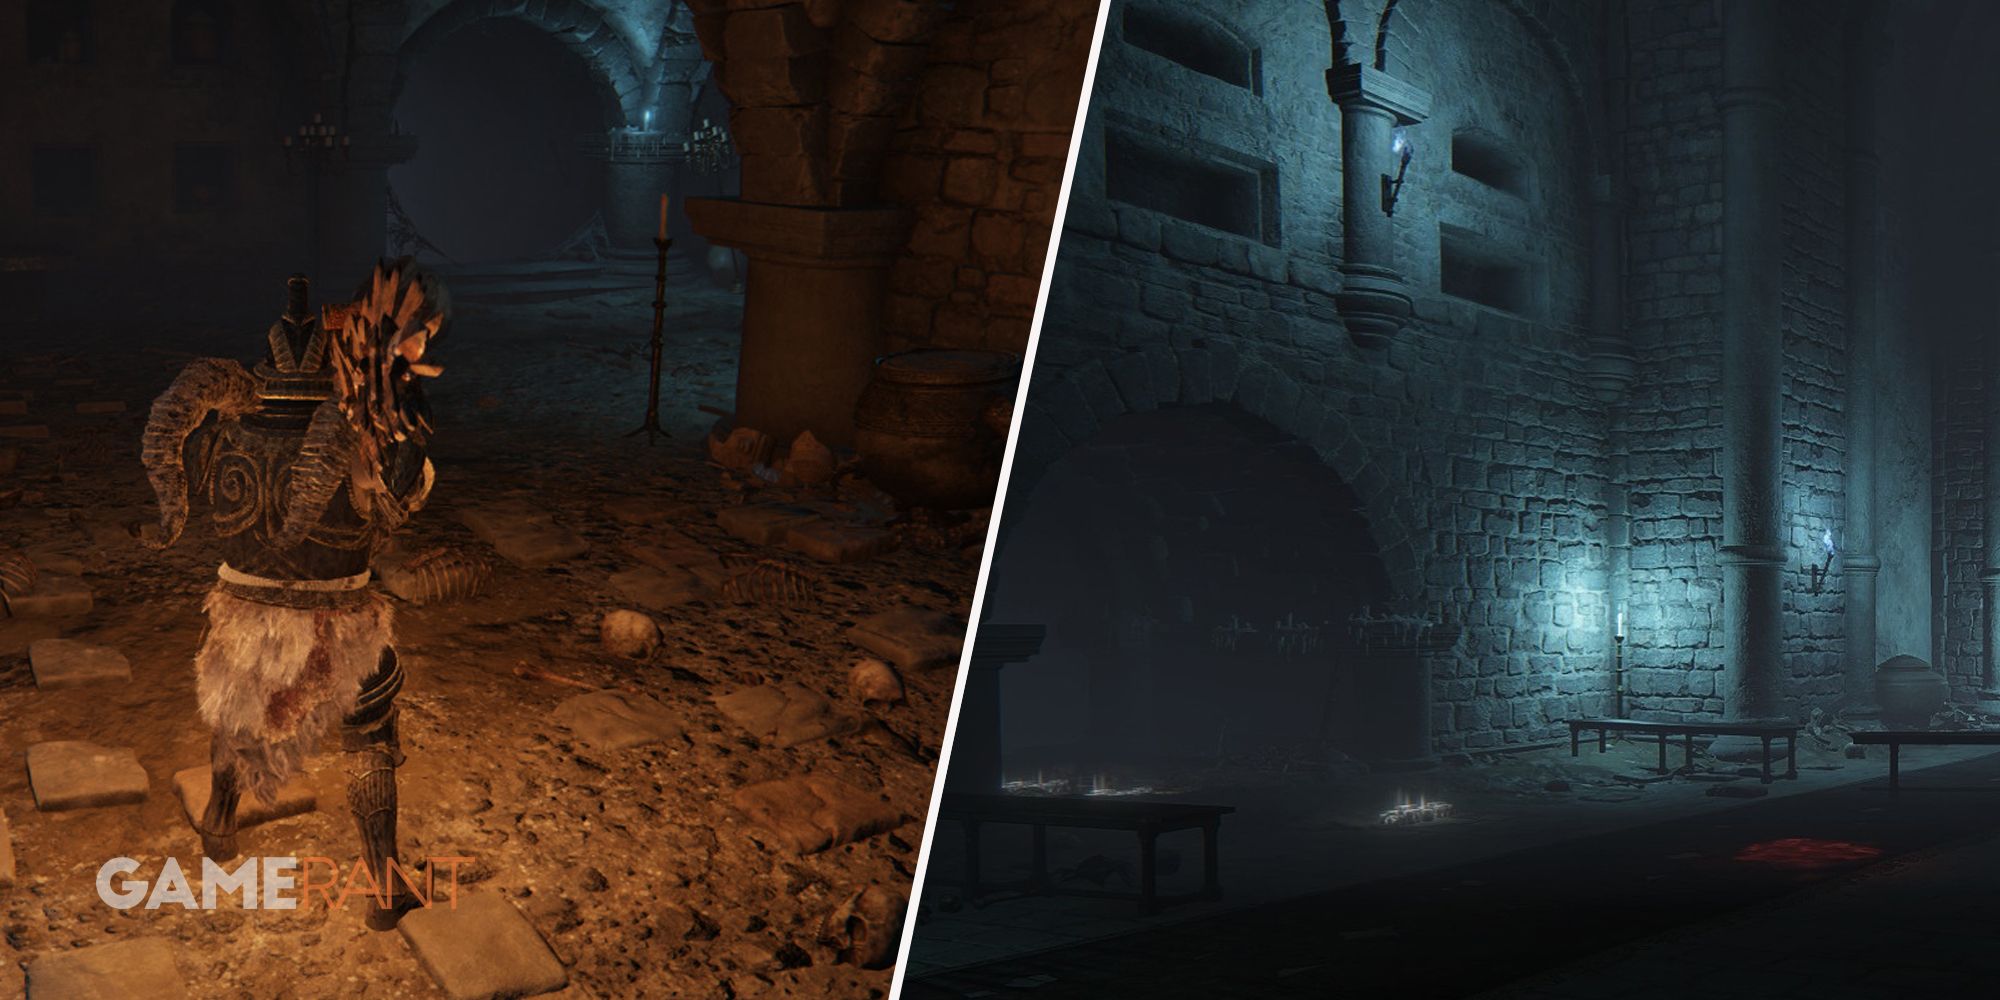 Elden Ring player about to enter the Auriza side tomb on left, Auriza Side Tomb location screenshot on right